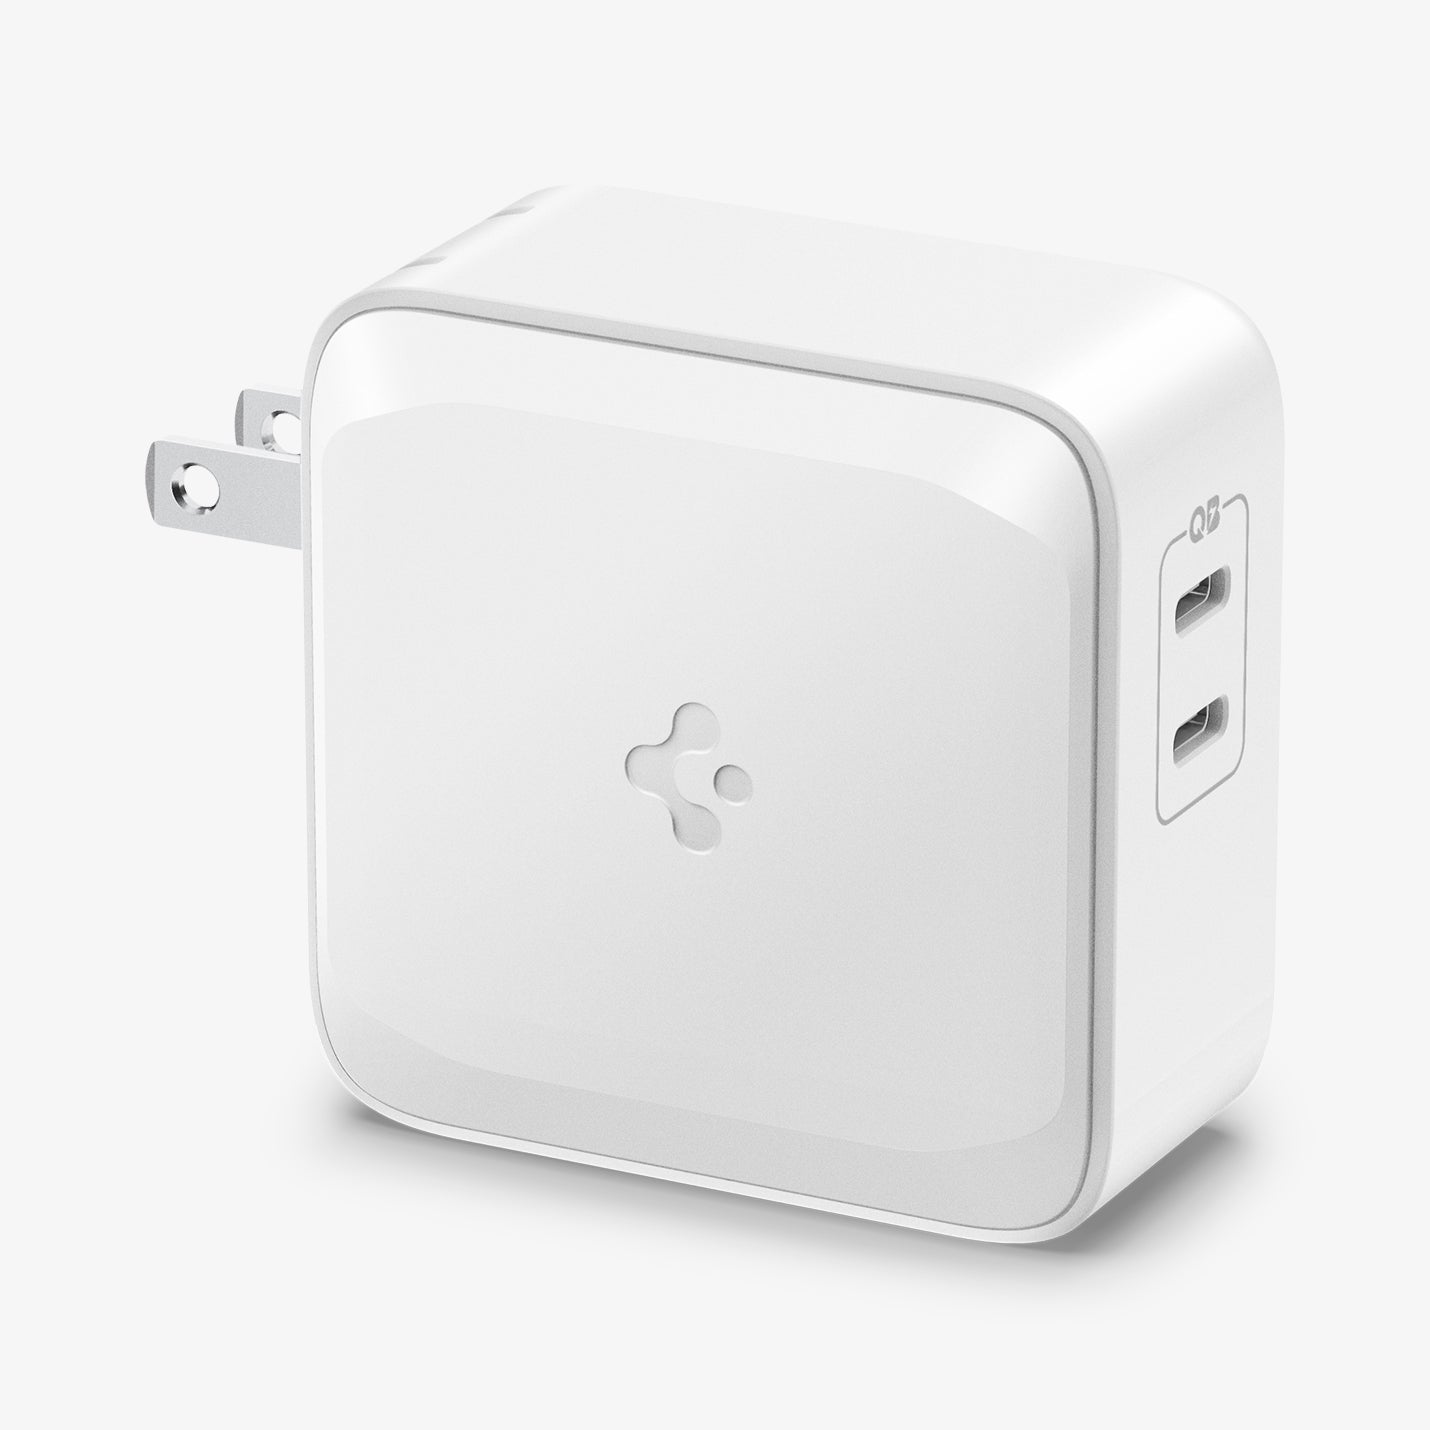 ACH02081 - ArcStation™ Pro GaN 70W Dual Port Wall Charger PE2007 in White showing the side with the spigen logo and partial top and sides of a charger